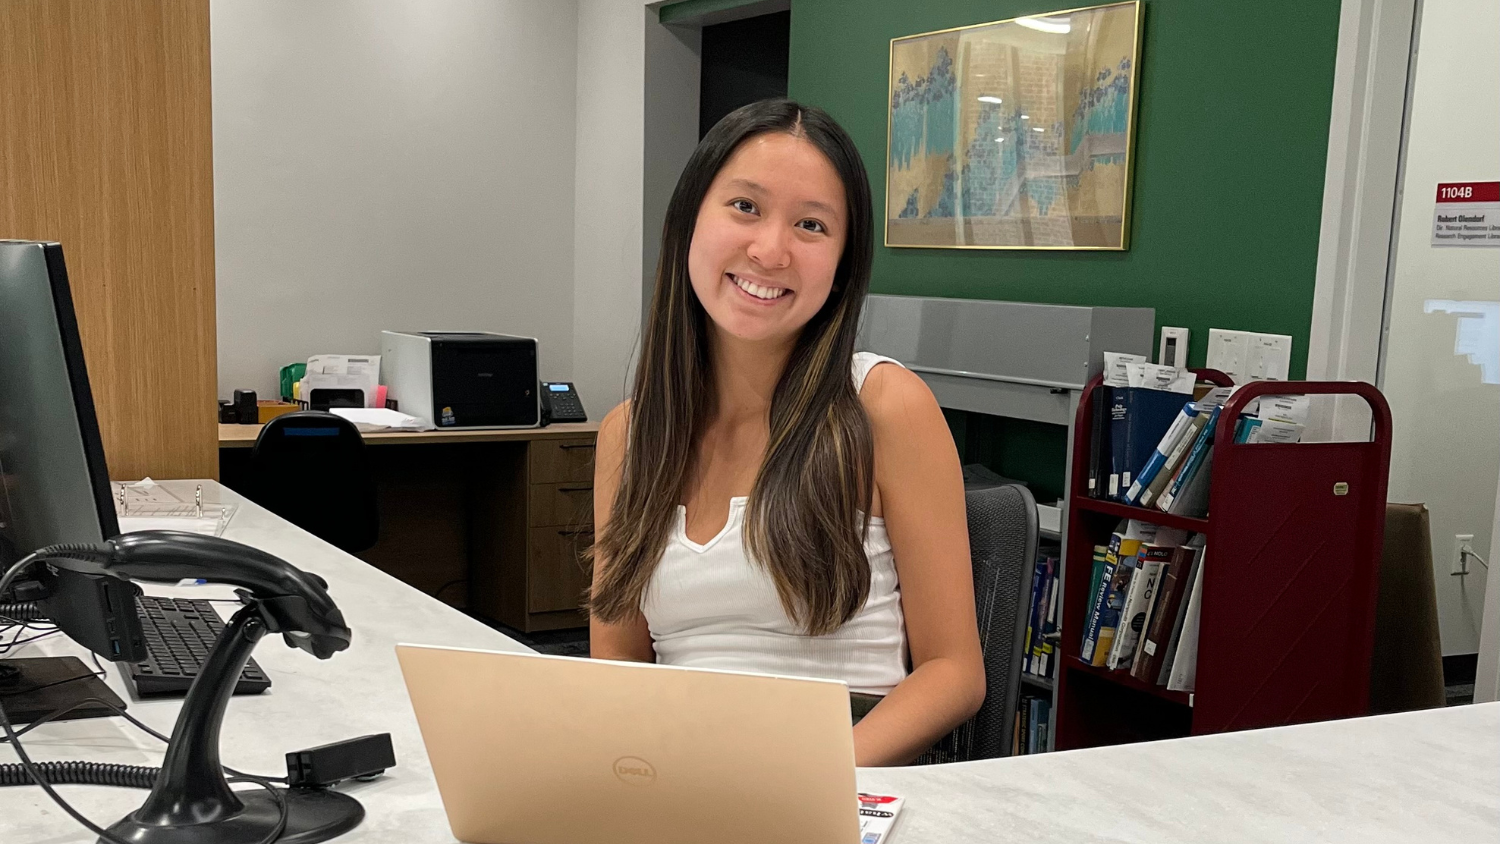 Brianna sits at library desk - Libraries Scholarship Fund Supports Brianna Bud's Passion for Engineering - College of Natural Resources News NC State University